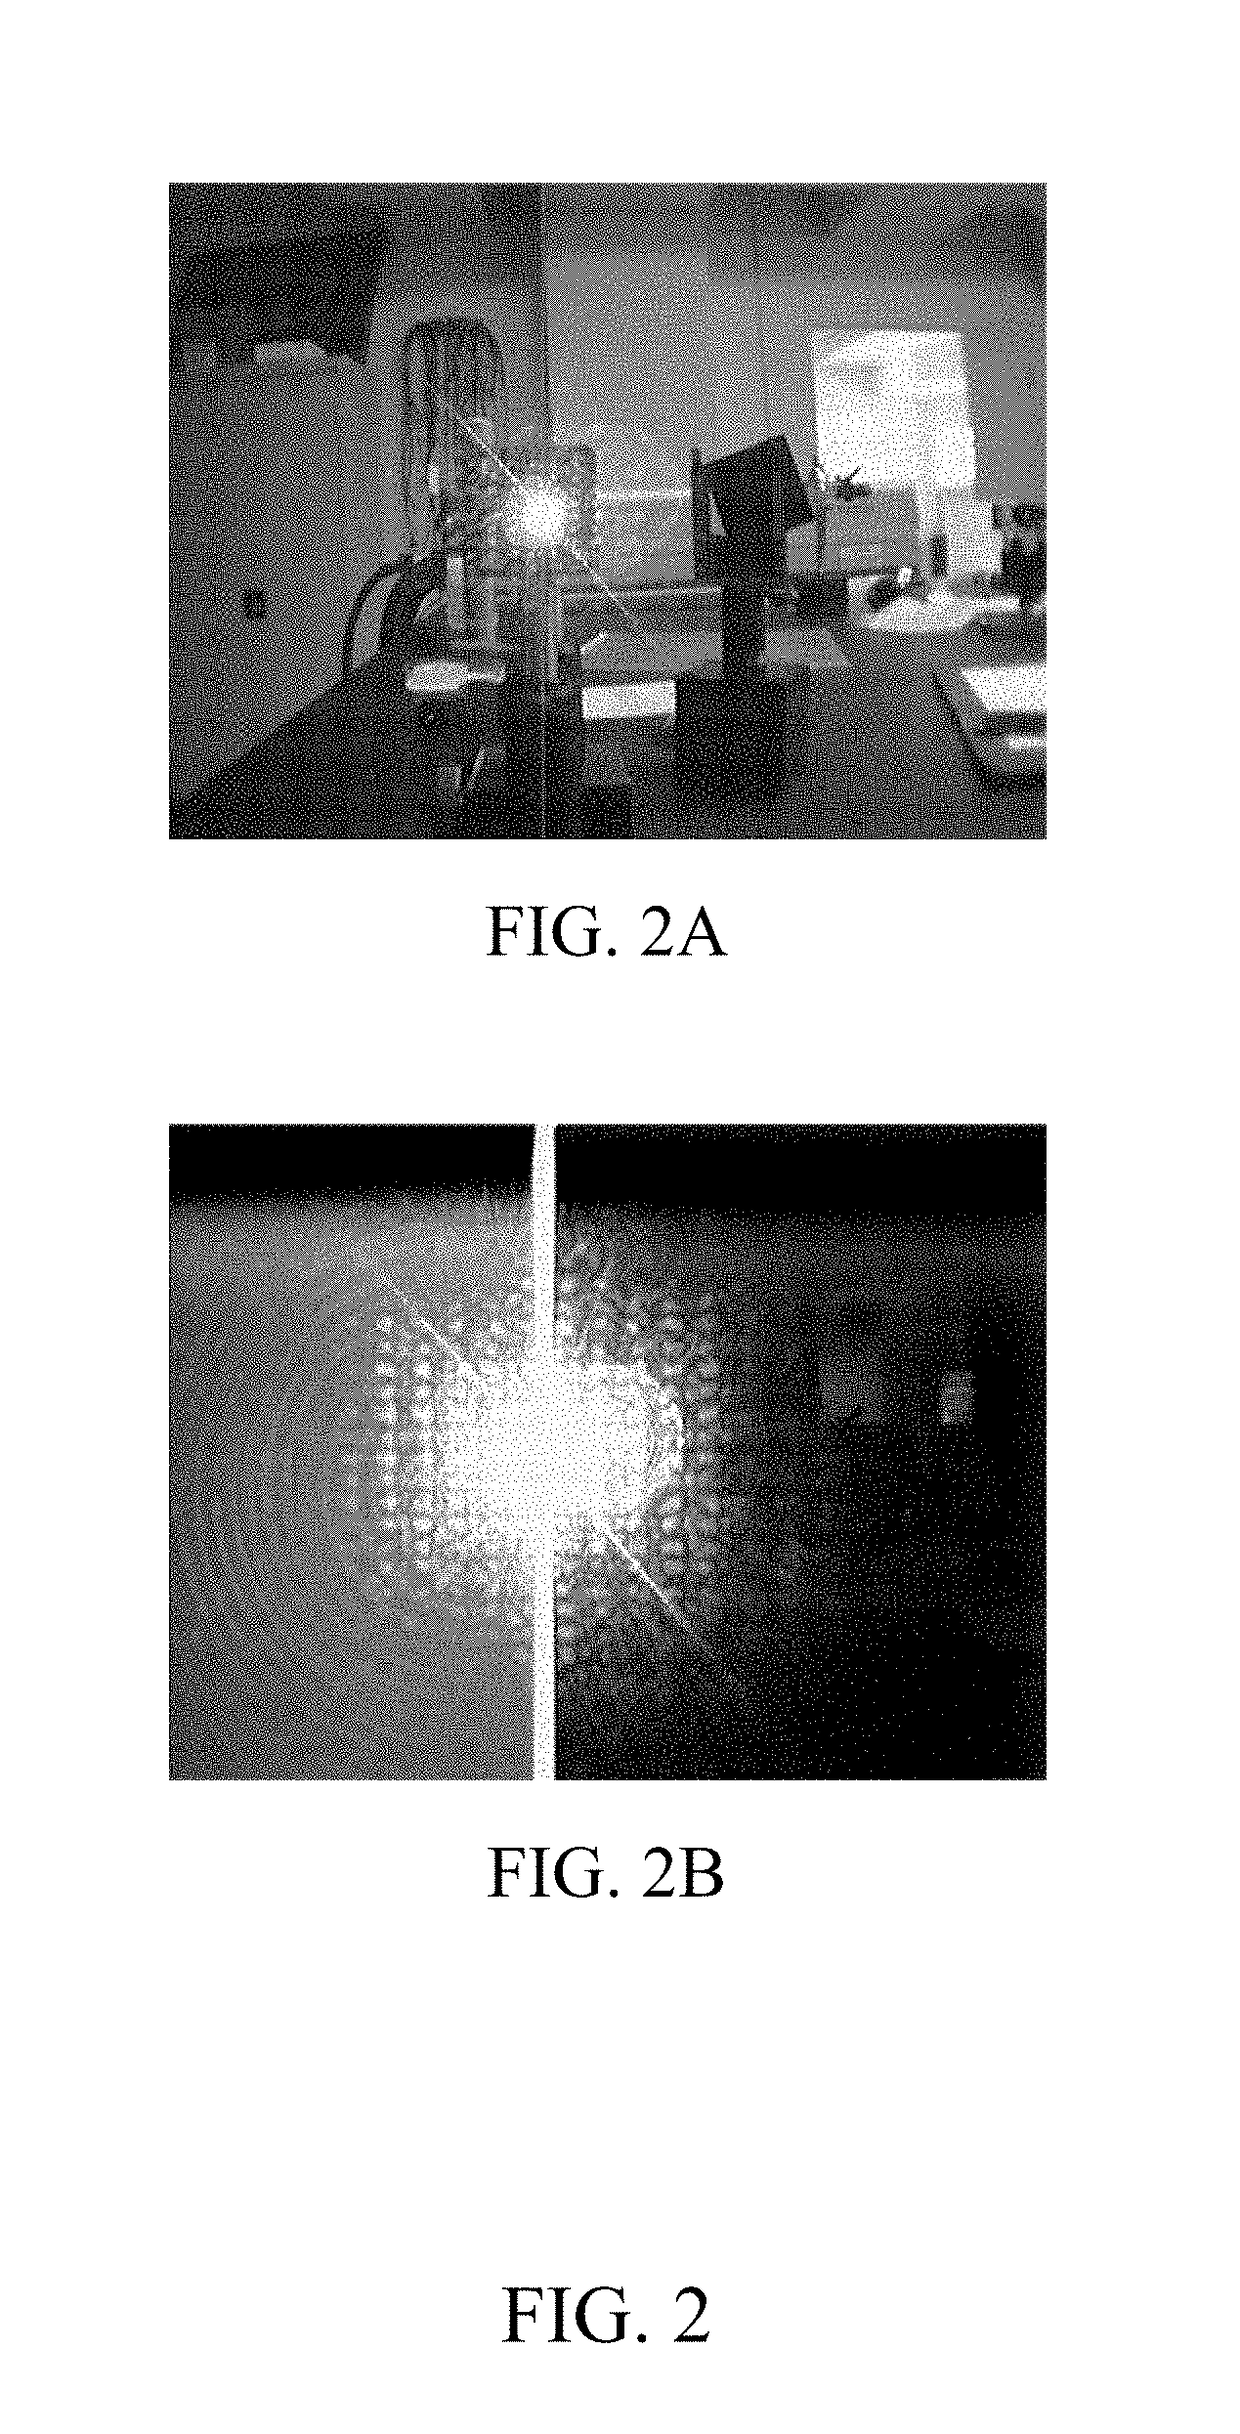 Method for camera detection and jamming